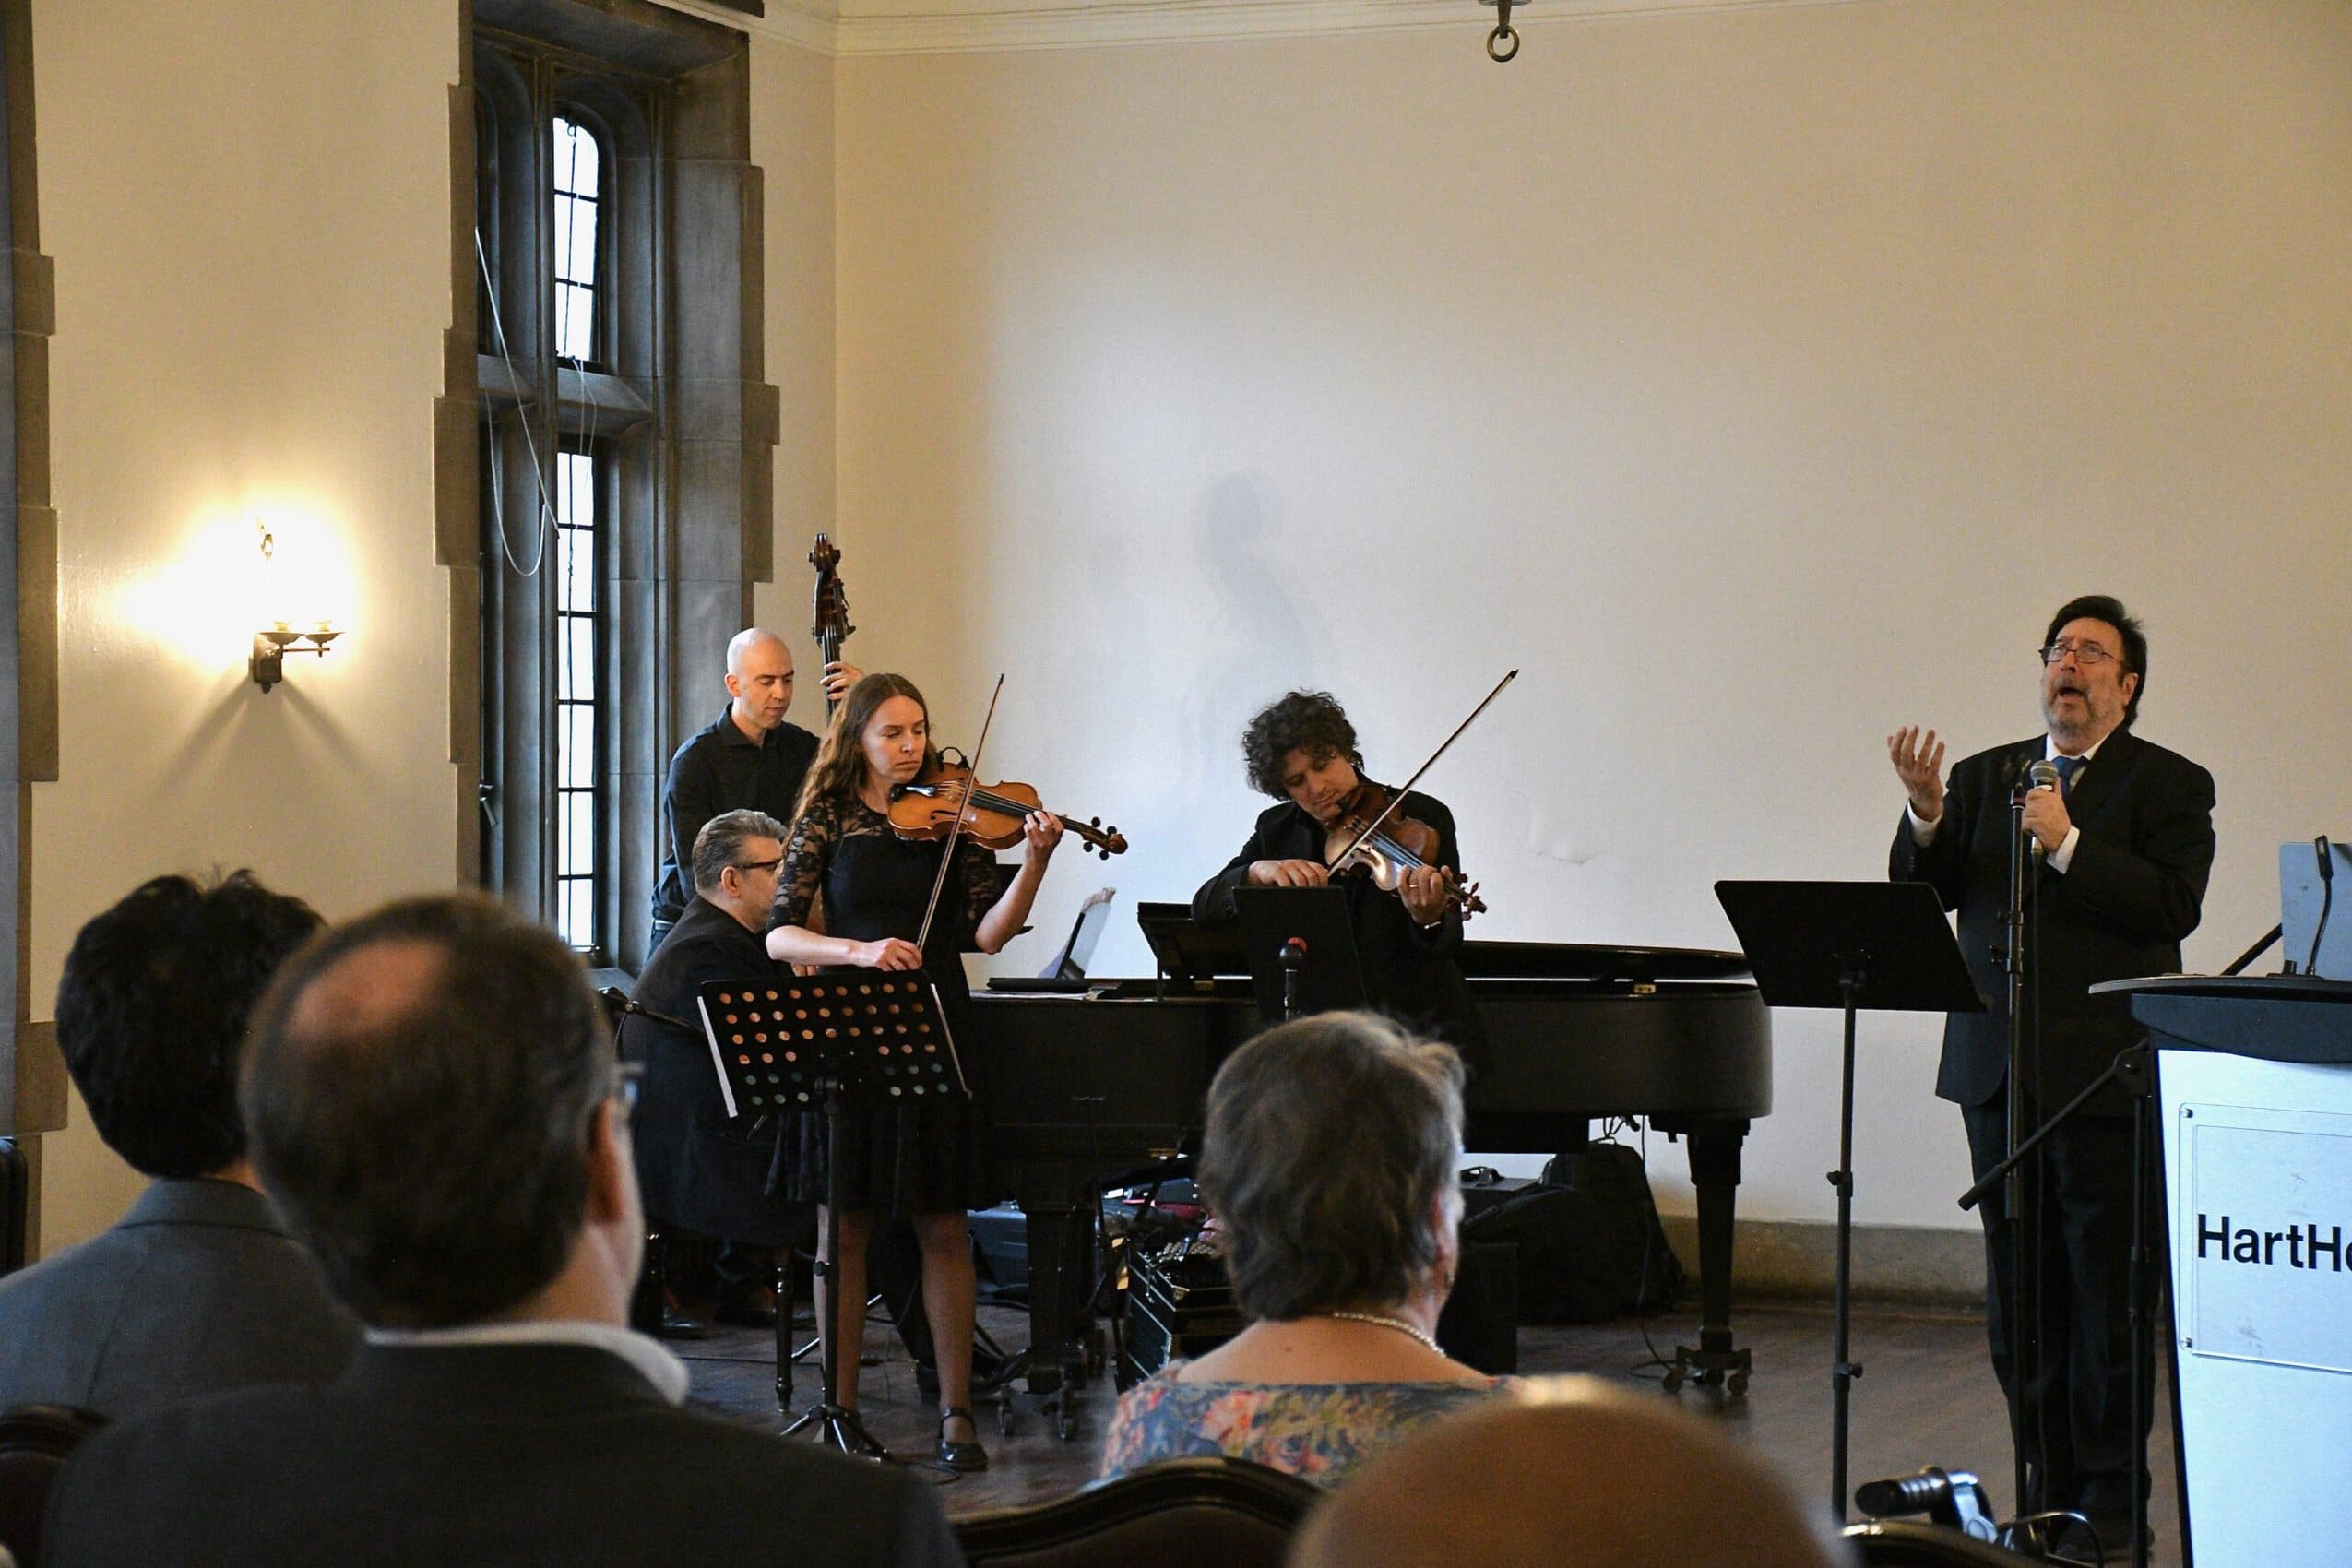 A musical performance with three musicians and a singer